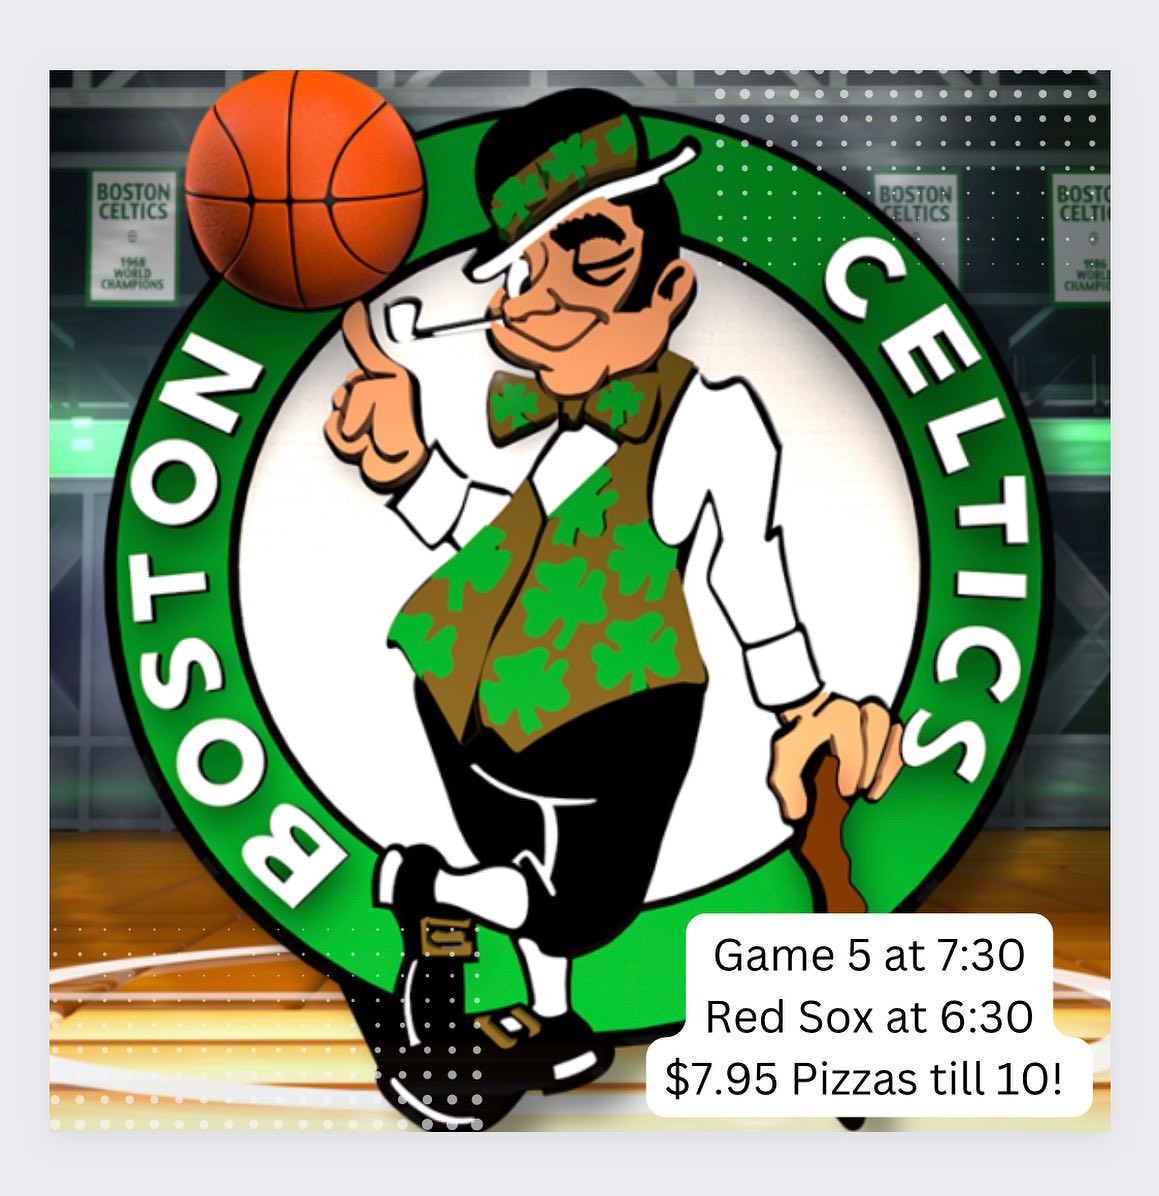 Let’s go Celtics!! See you tonight for game 5!$7.95 Pizzas until the kitchen closes!